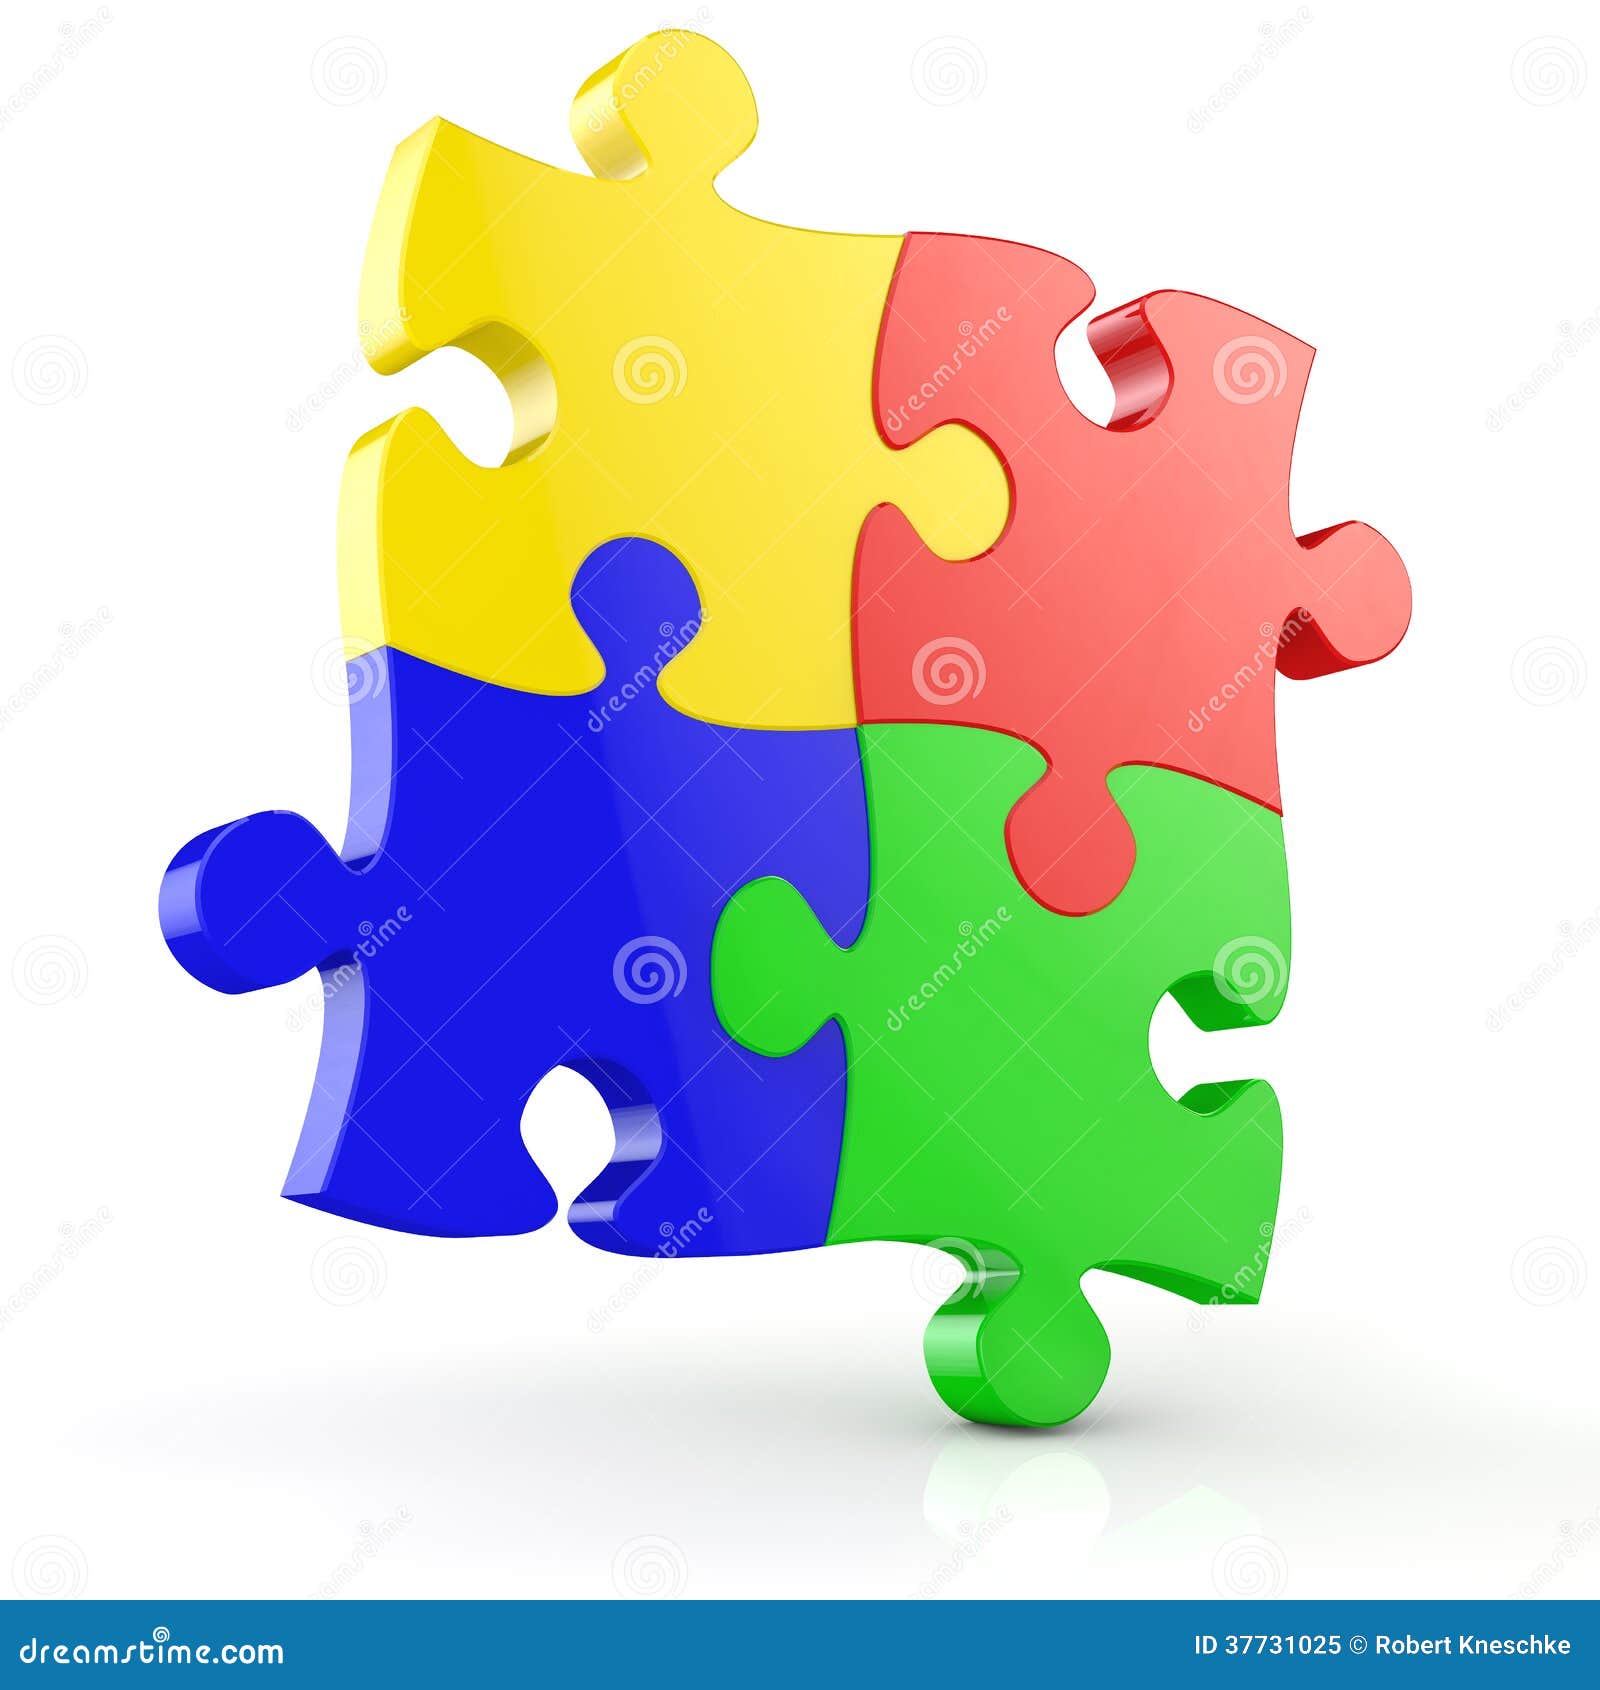 Four Jigsaw Puzzle Pieces Colorful White Background 37731025 